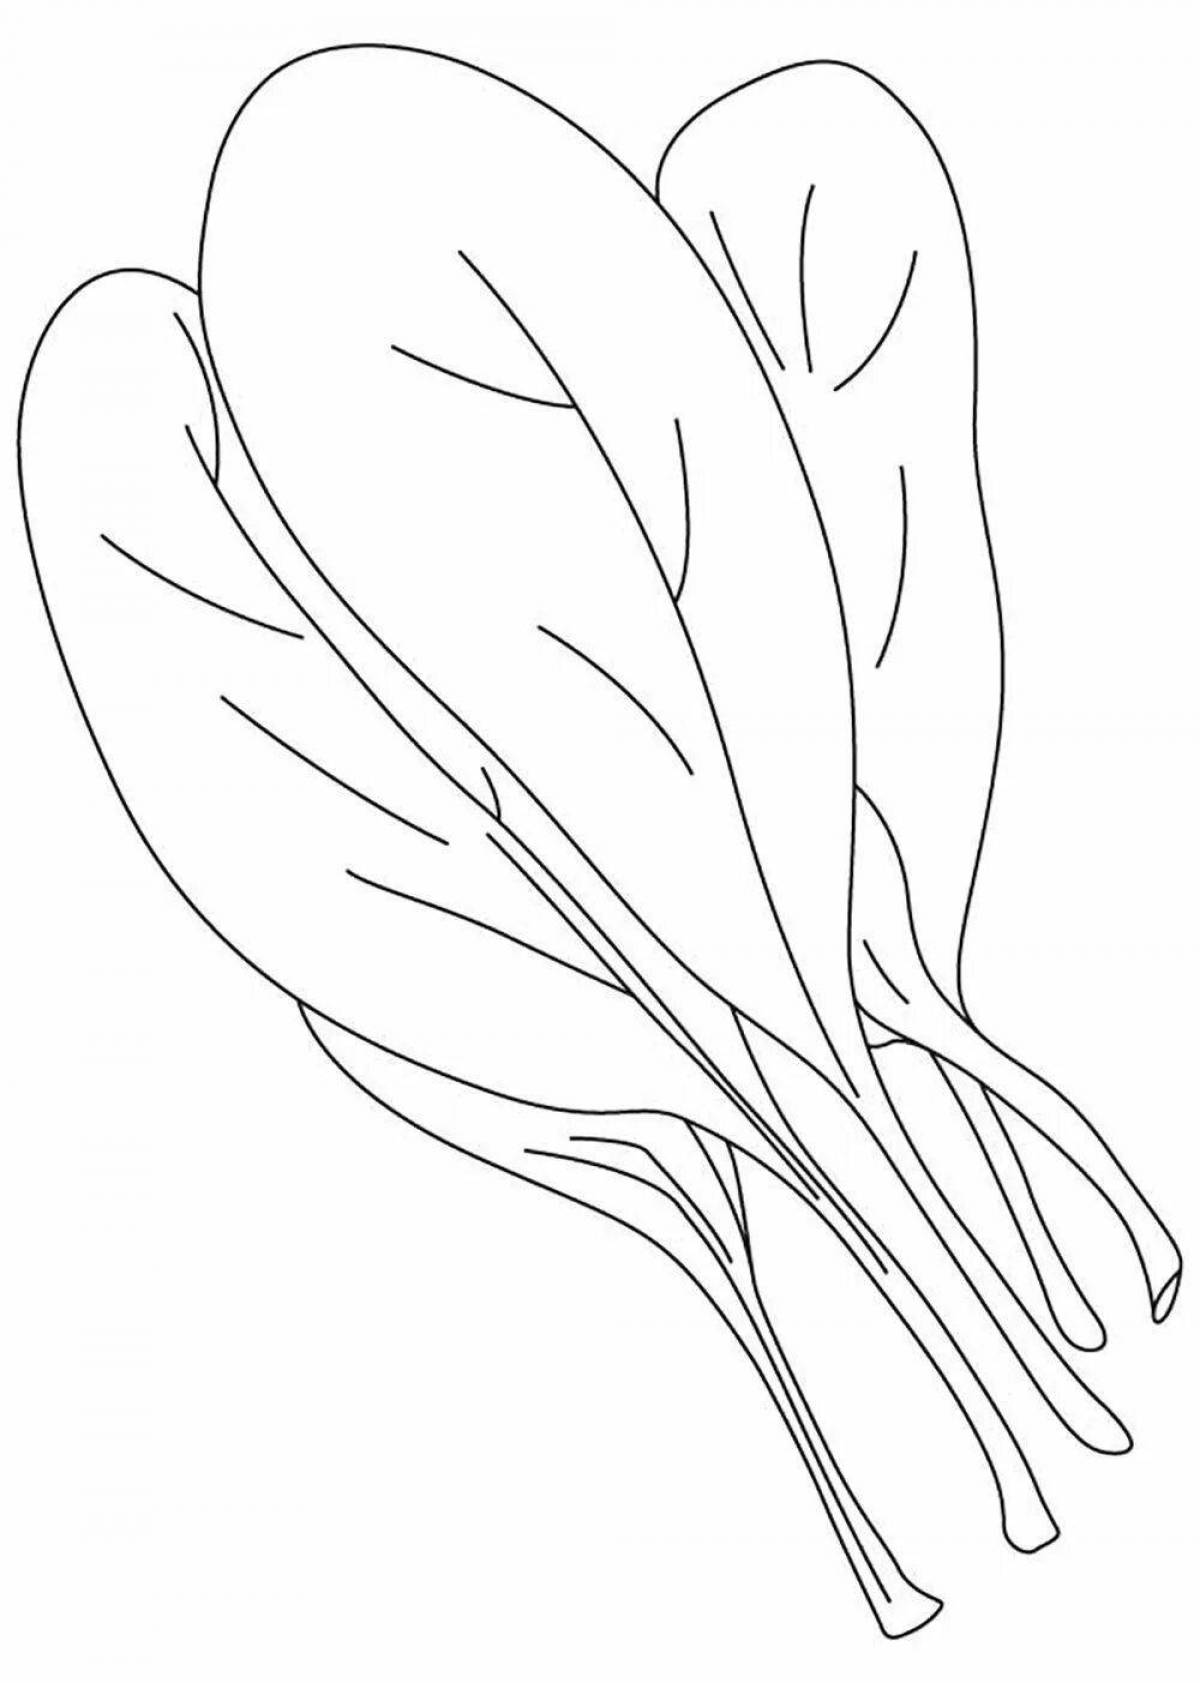 Sorrel Magnificent Coloring Page for Students